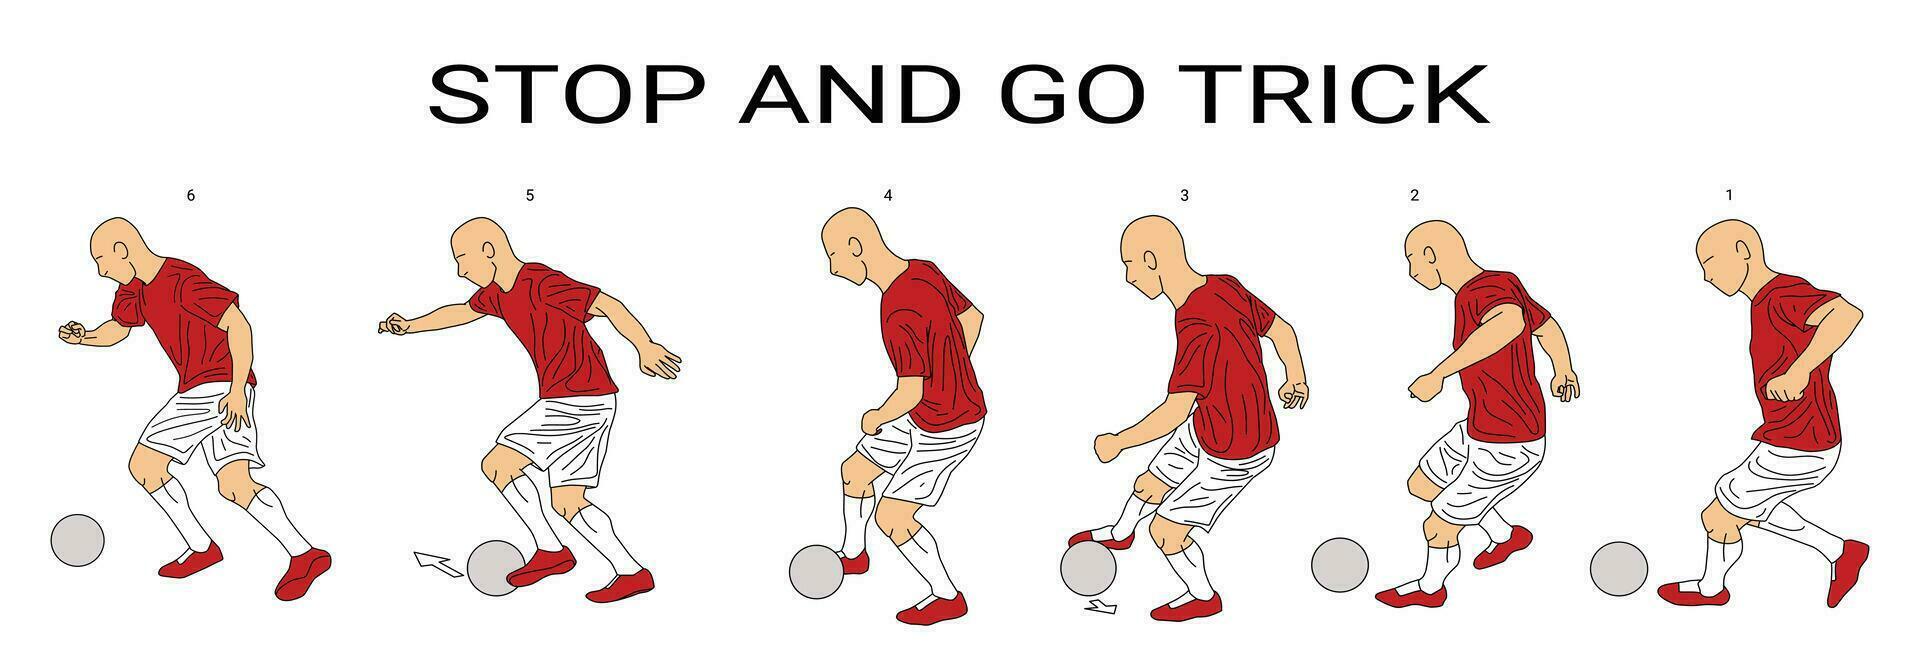 Stop and go trick image for soccer sports education, suitable for sports books, sports apps, sports manuals, and more vector